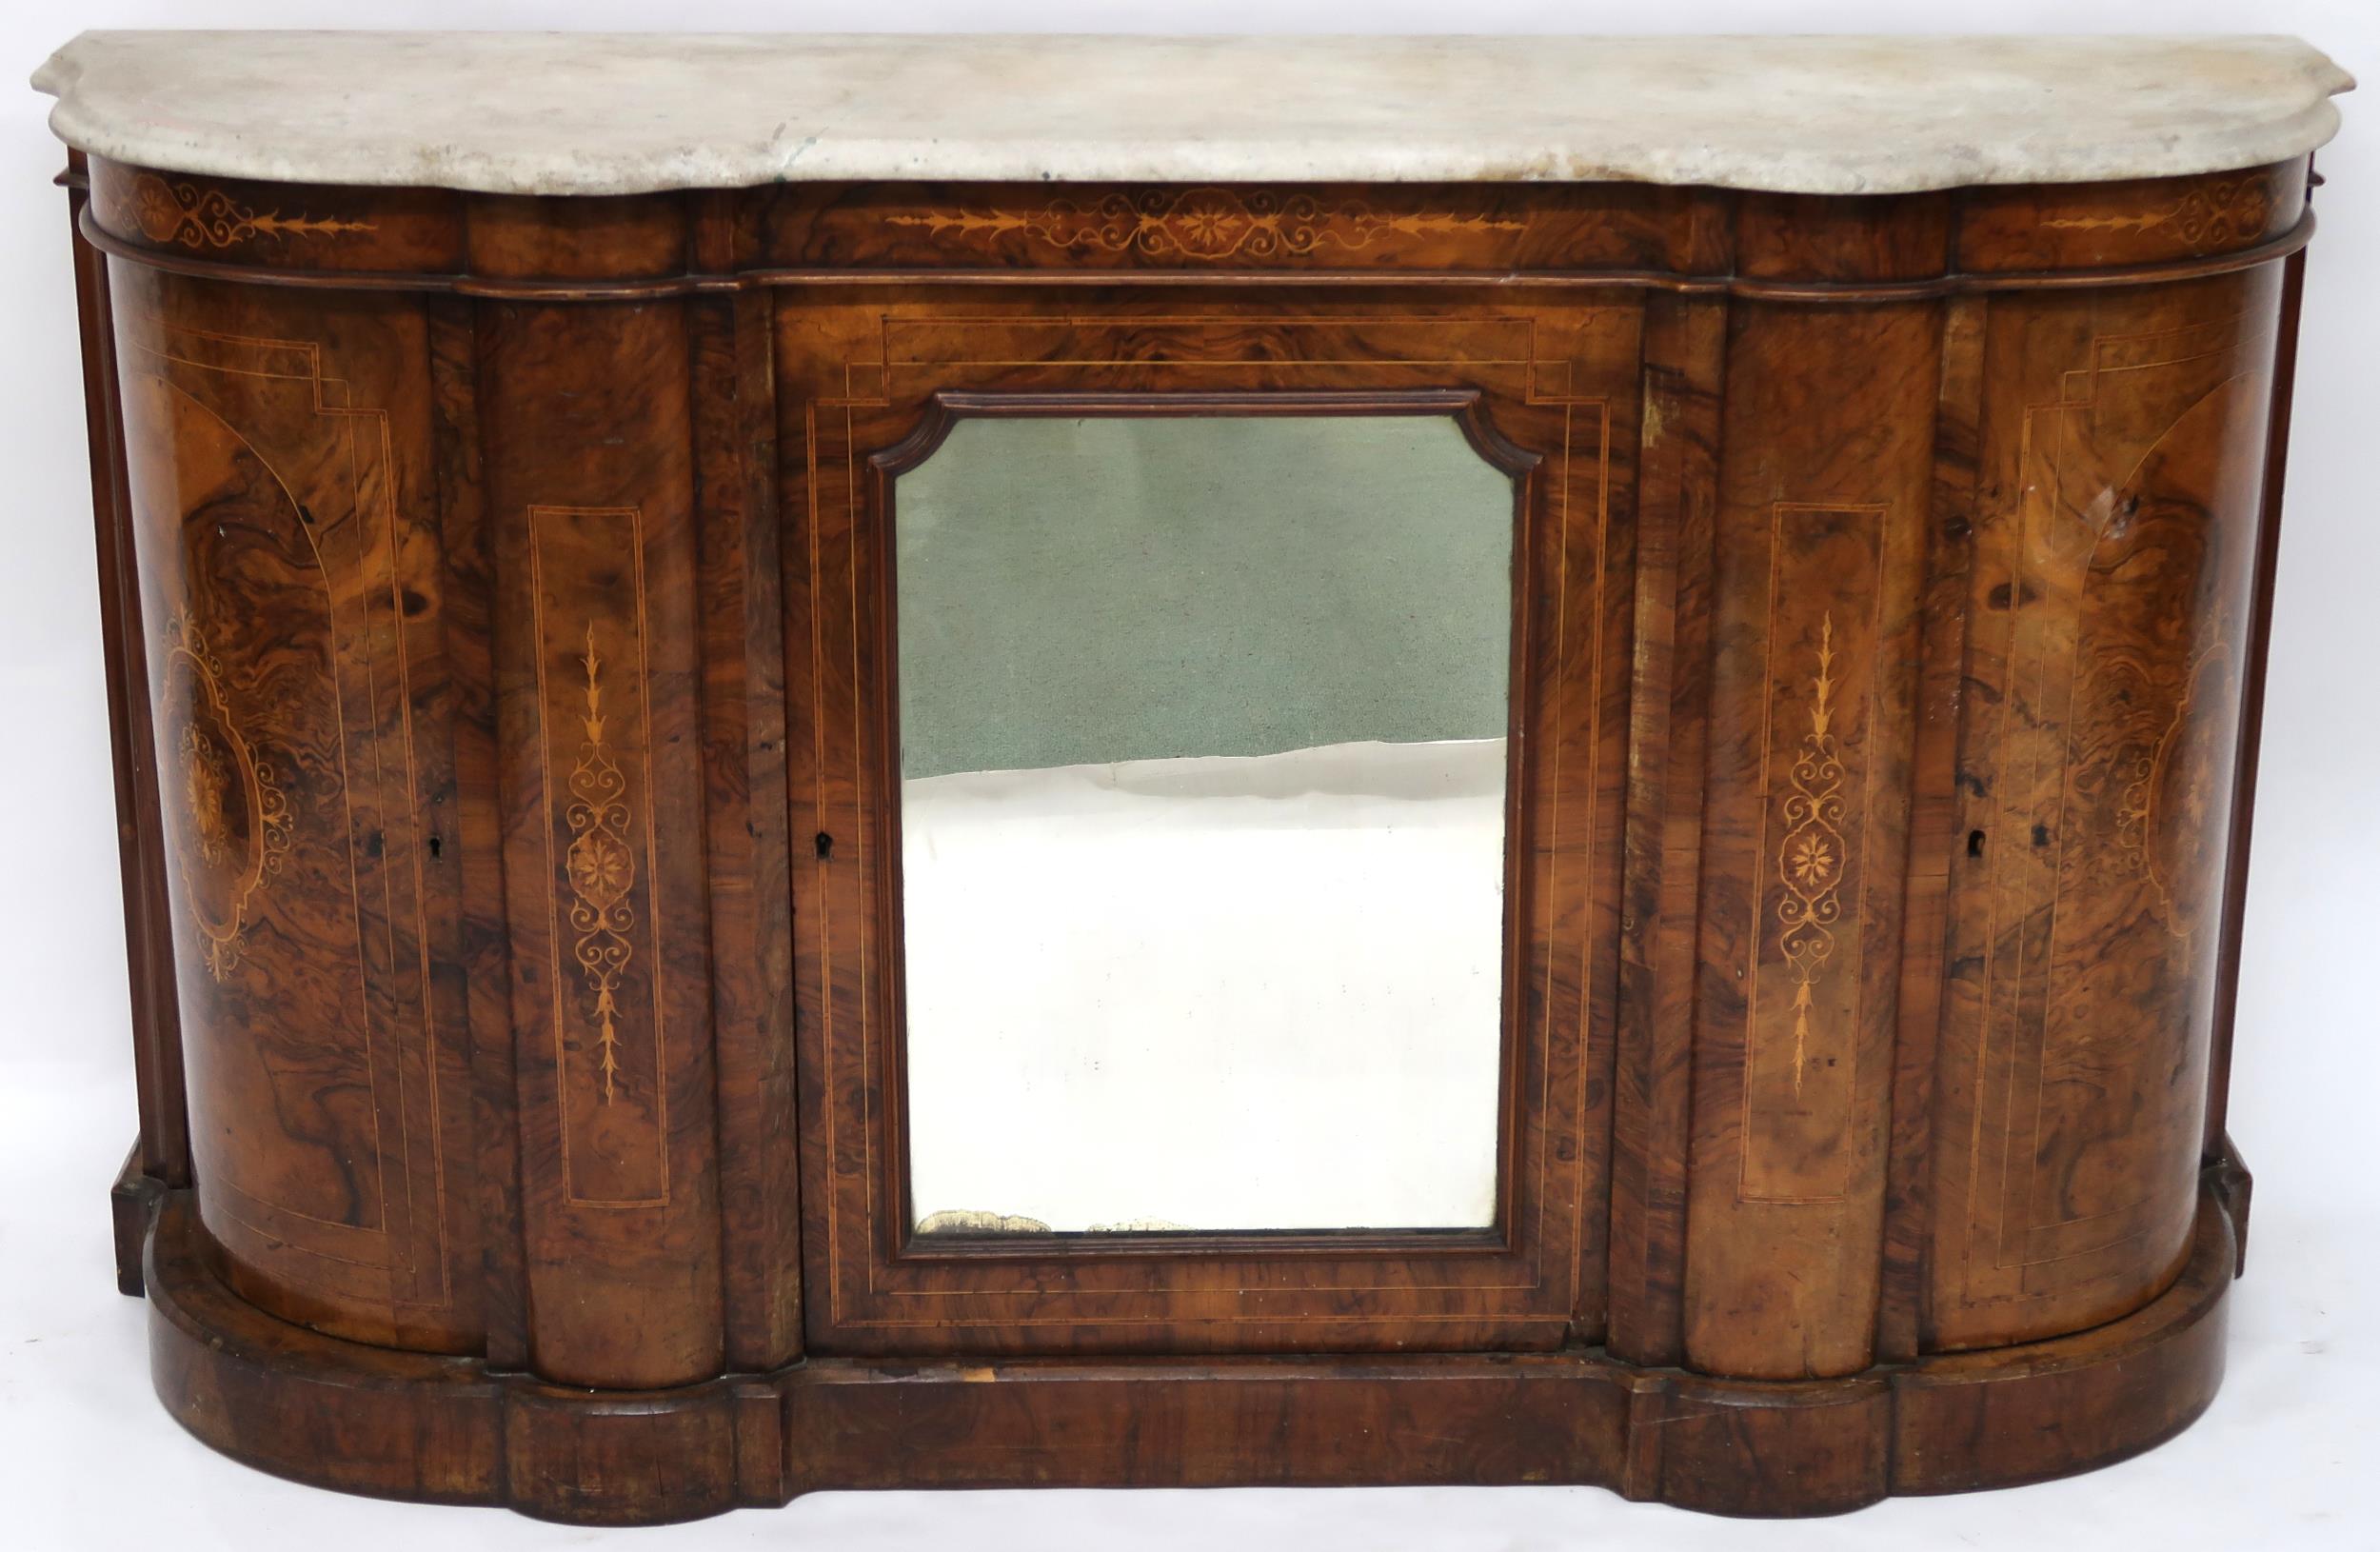 A VICTORIAN BURR WALNUT AND SATINWOOD INLAID CREDENZA  with shaped marble top over central